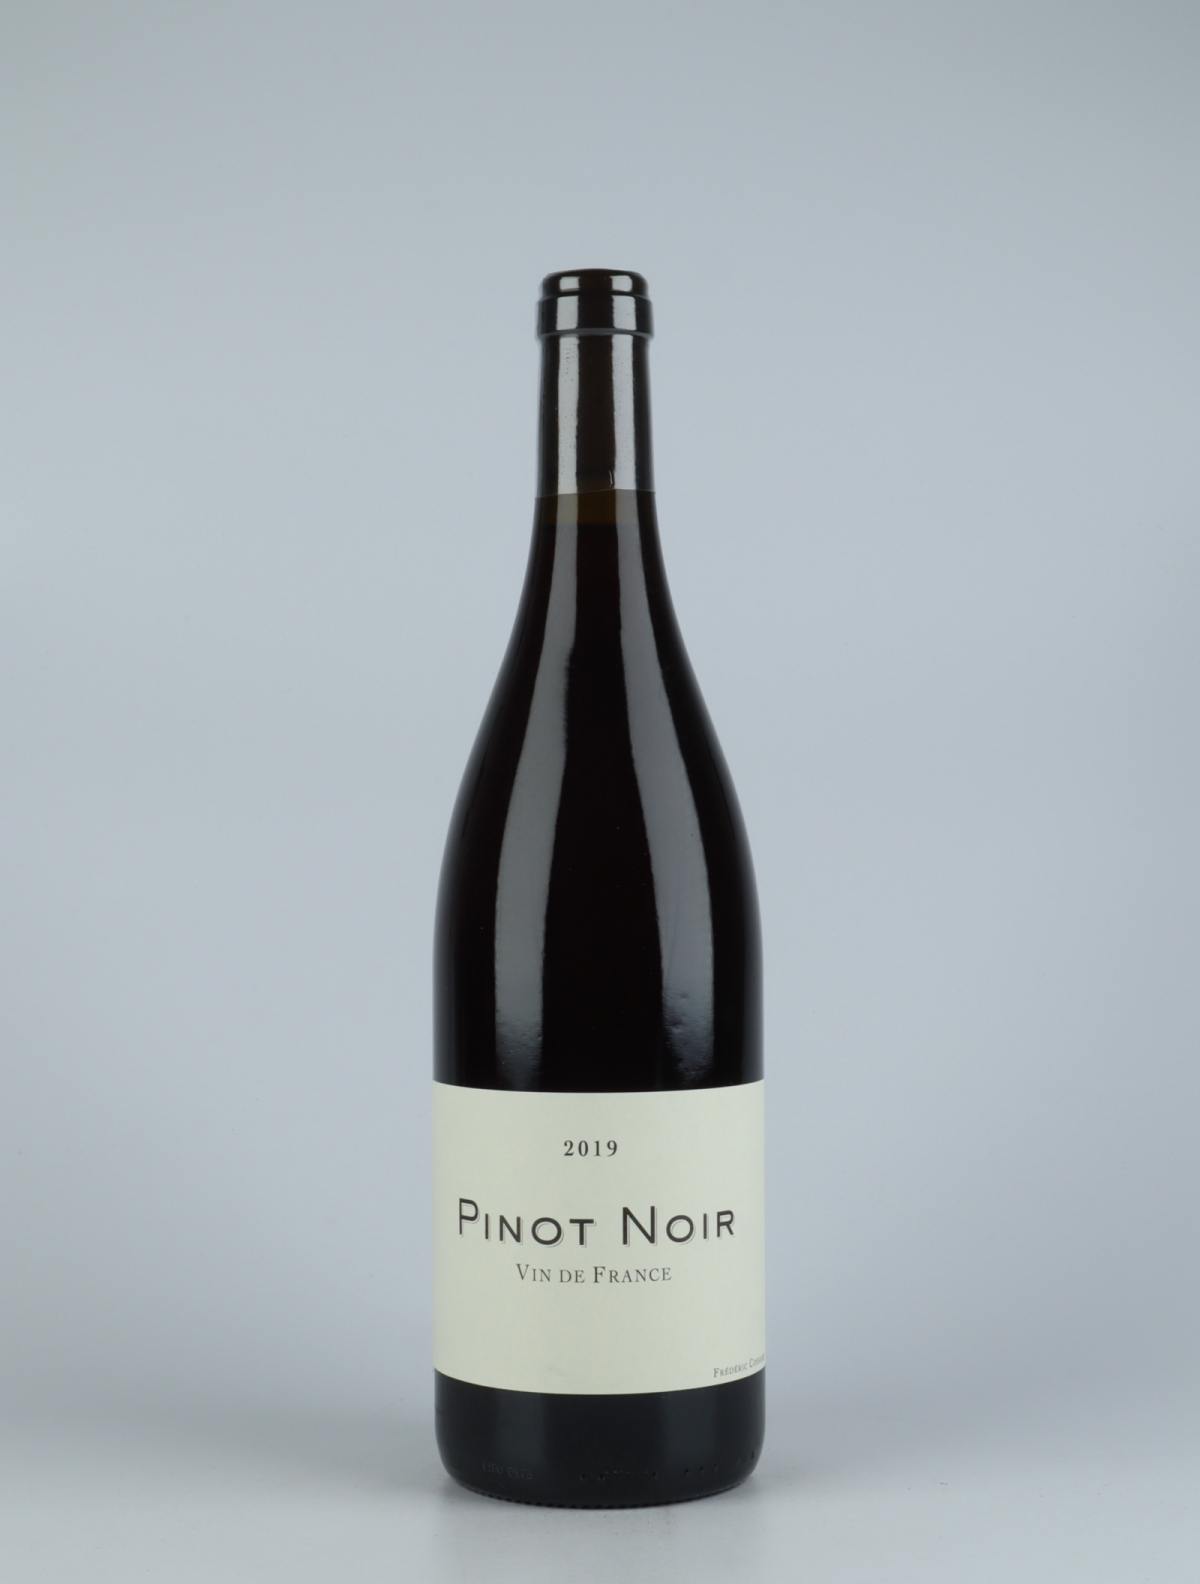 A bottle 2019 Pinot Noir Red wine from Frédéric Cossard, Burgundy in France